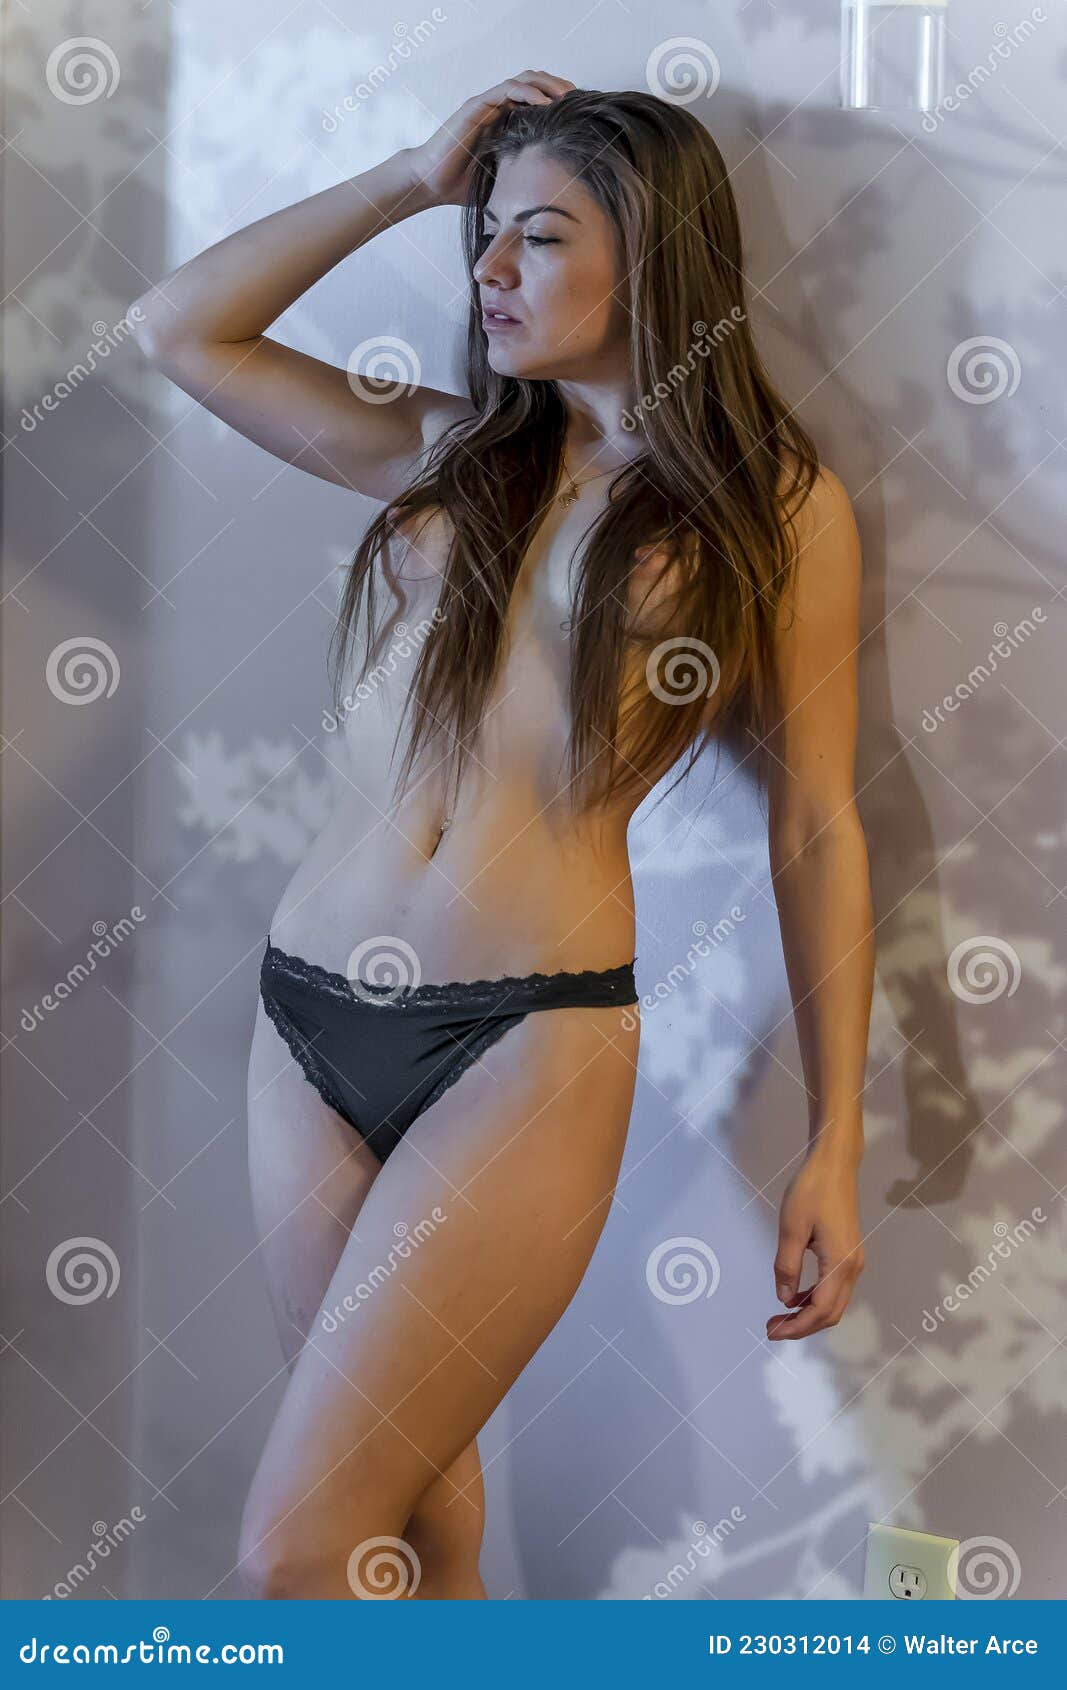 Gorgeous Hispanic Model Poses Nude in a Home Environment Stock Photo picture